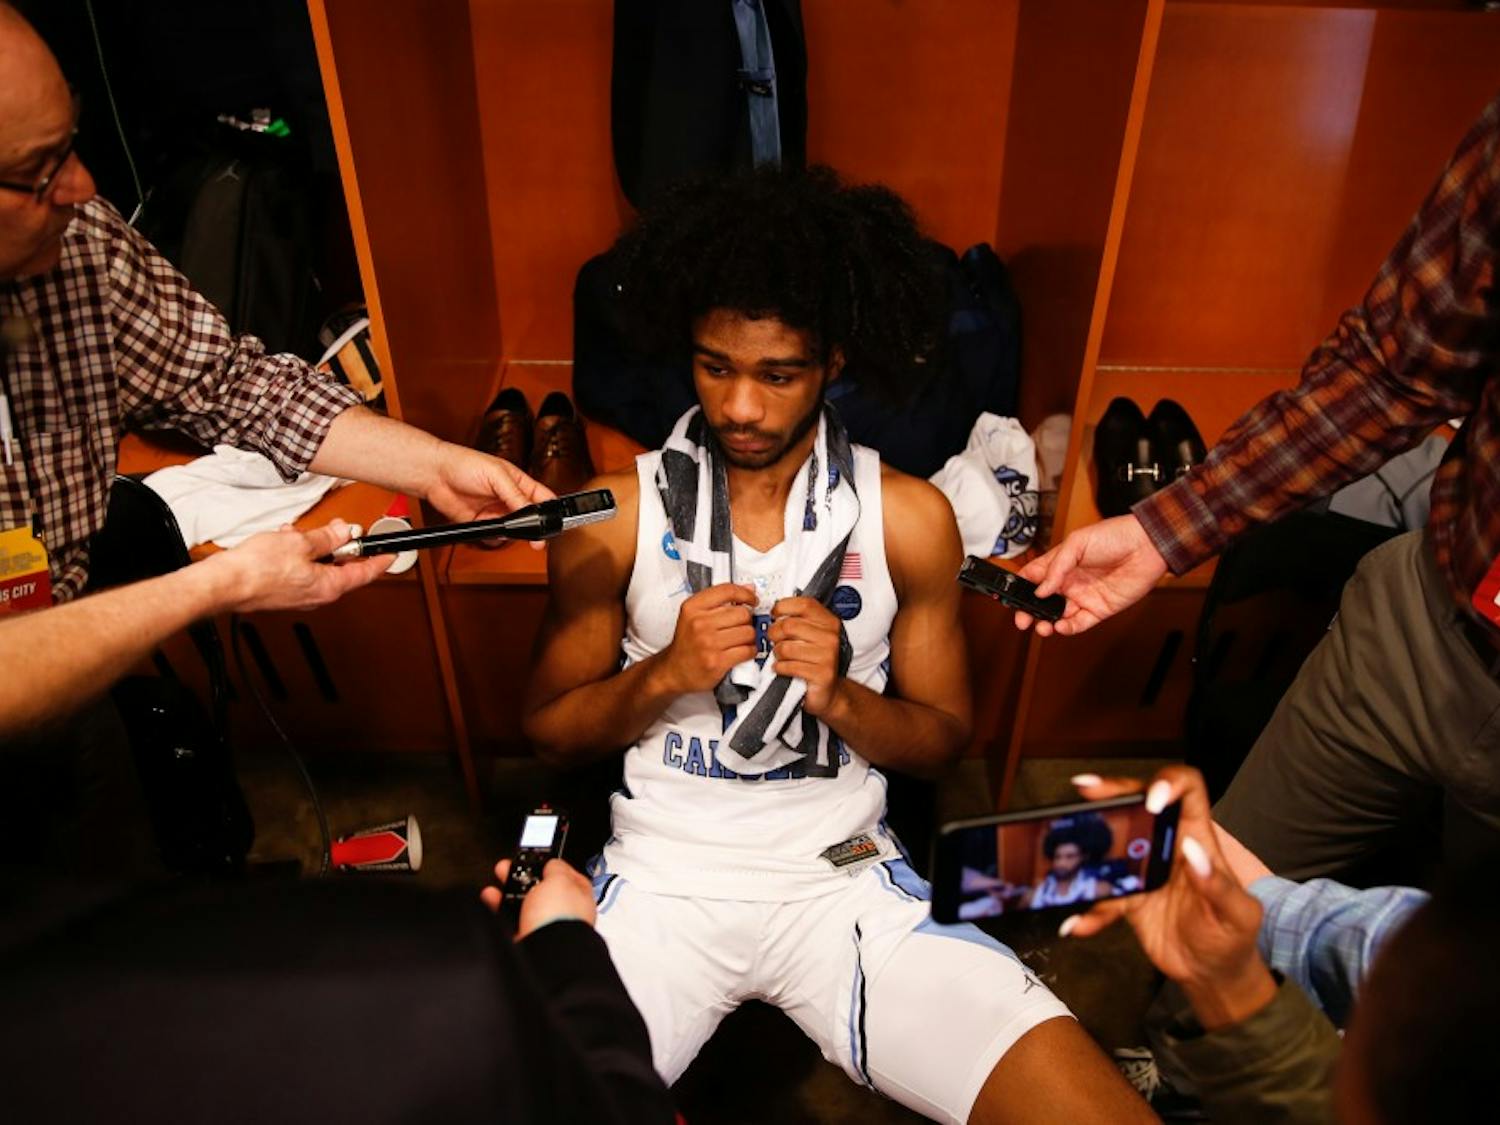 UNC first-year guard Coby White (2) answers reporters following UNC's 97-80 loss against Auburn University in the Sweet 16 round of the 2019 NCAA Tournament at the Sprint Center in Kansas City, M.O. on Friday, March 29, 2019. White shot 0-7 on three-pointers, ending his season with a 15-point game.